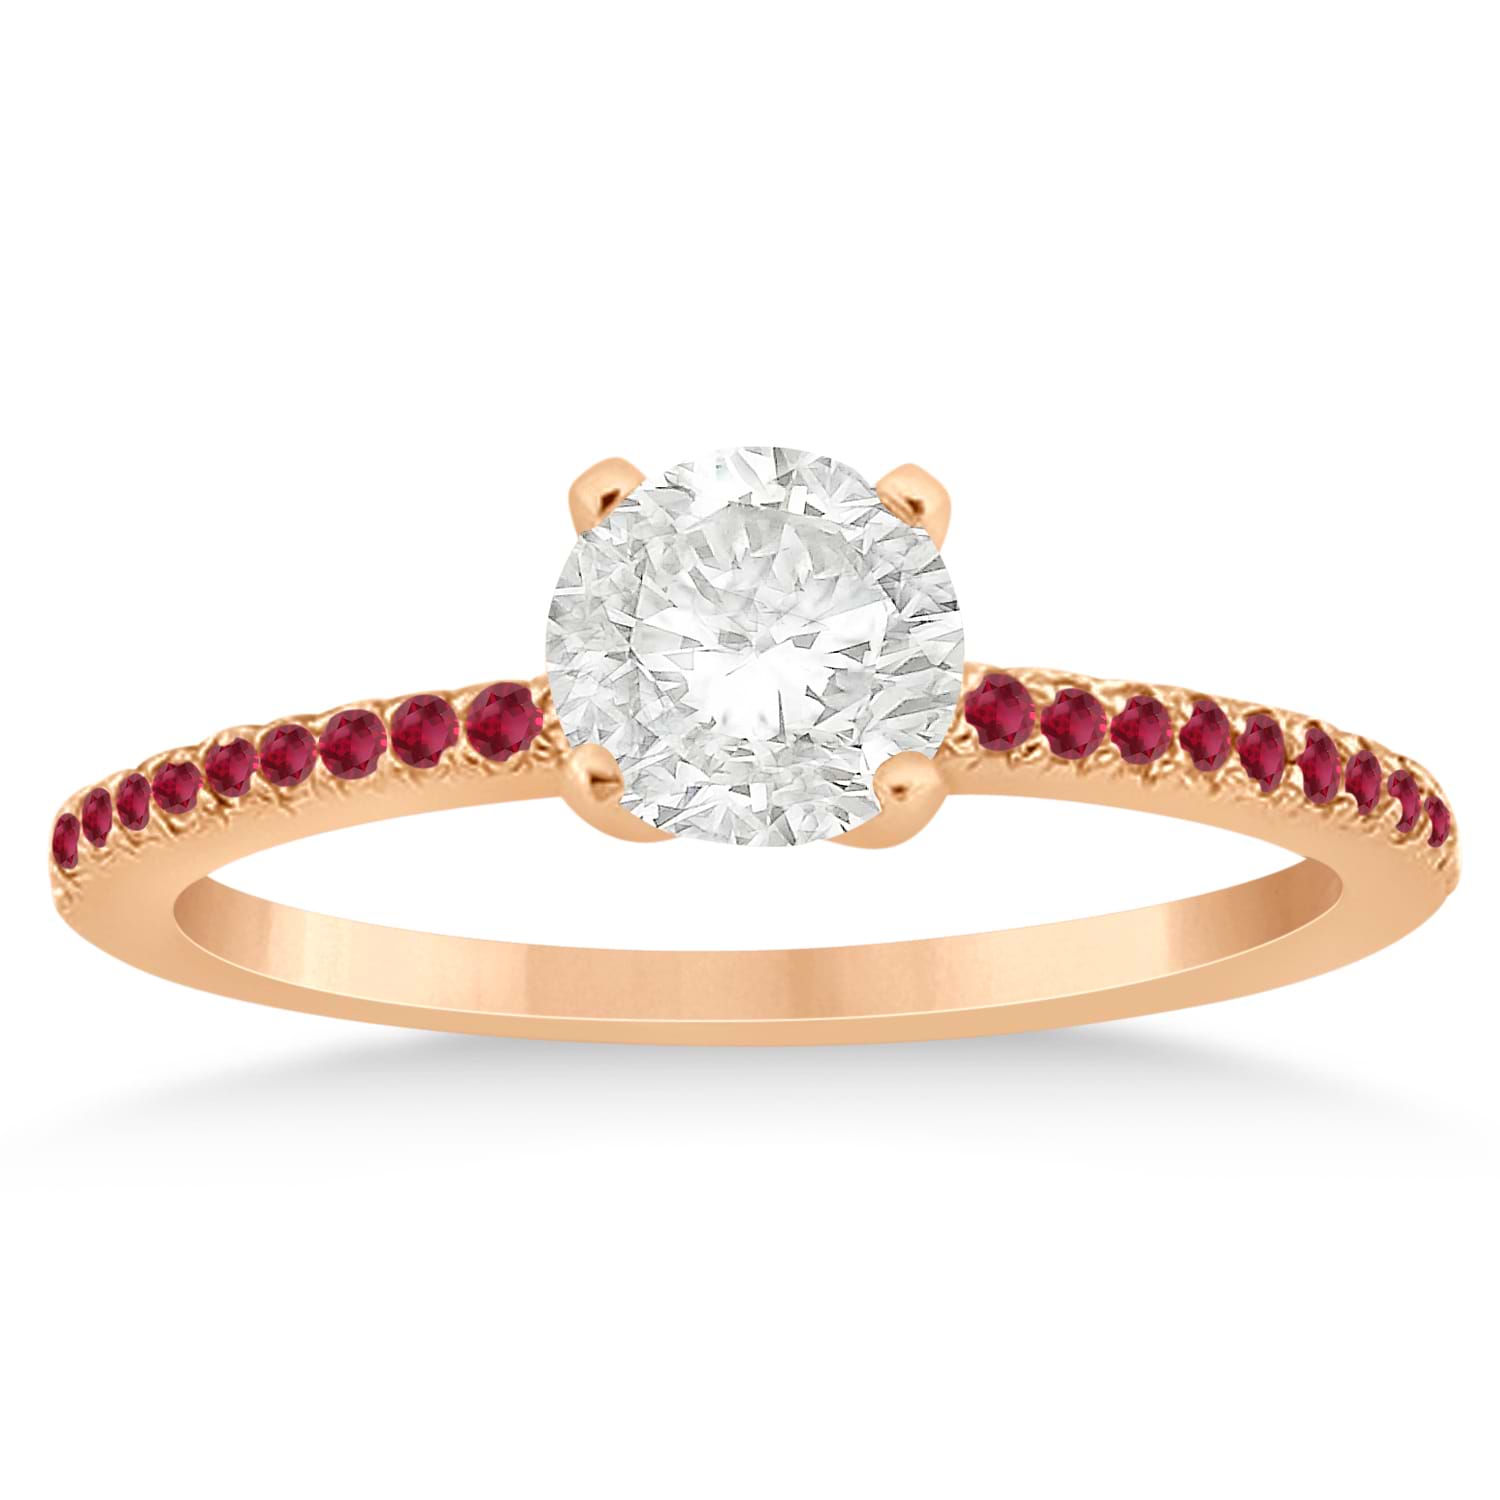 Ruby Accented Engagement Ring Setting 18k Rose Gold 0.18ct